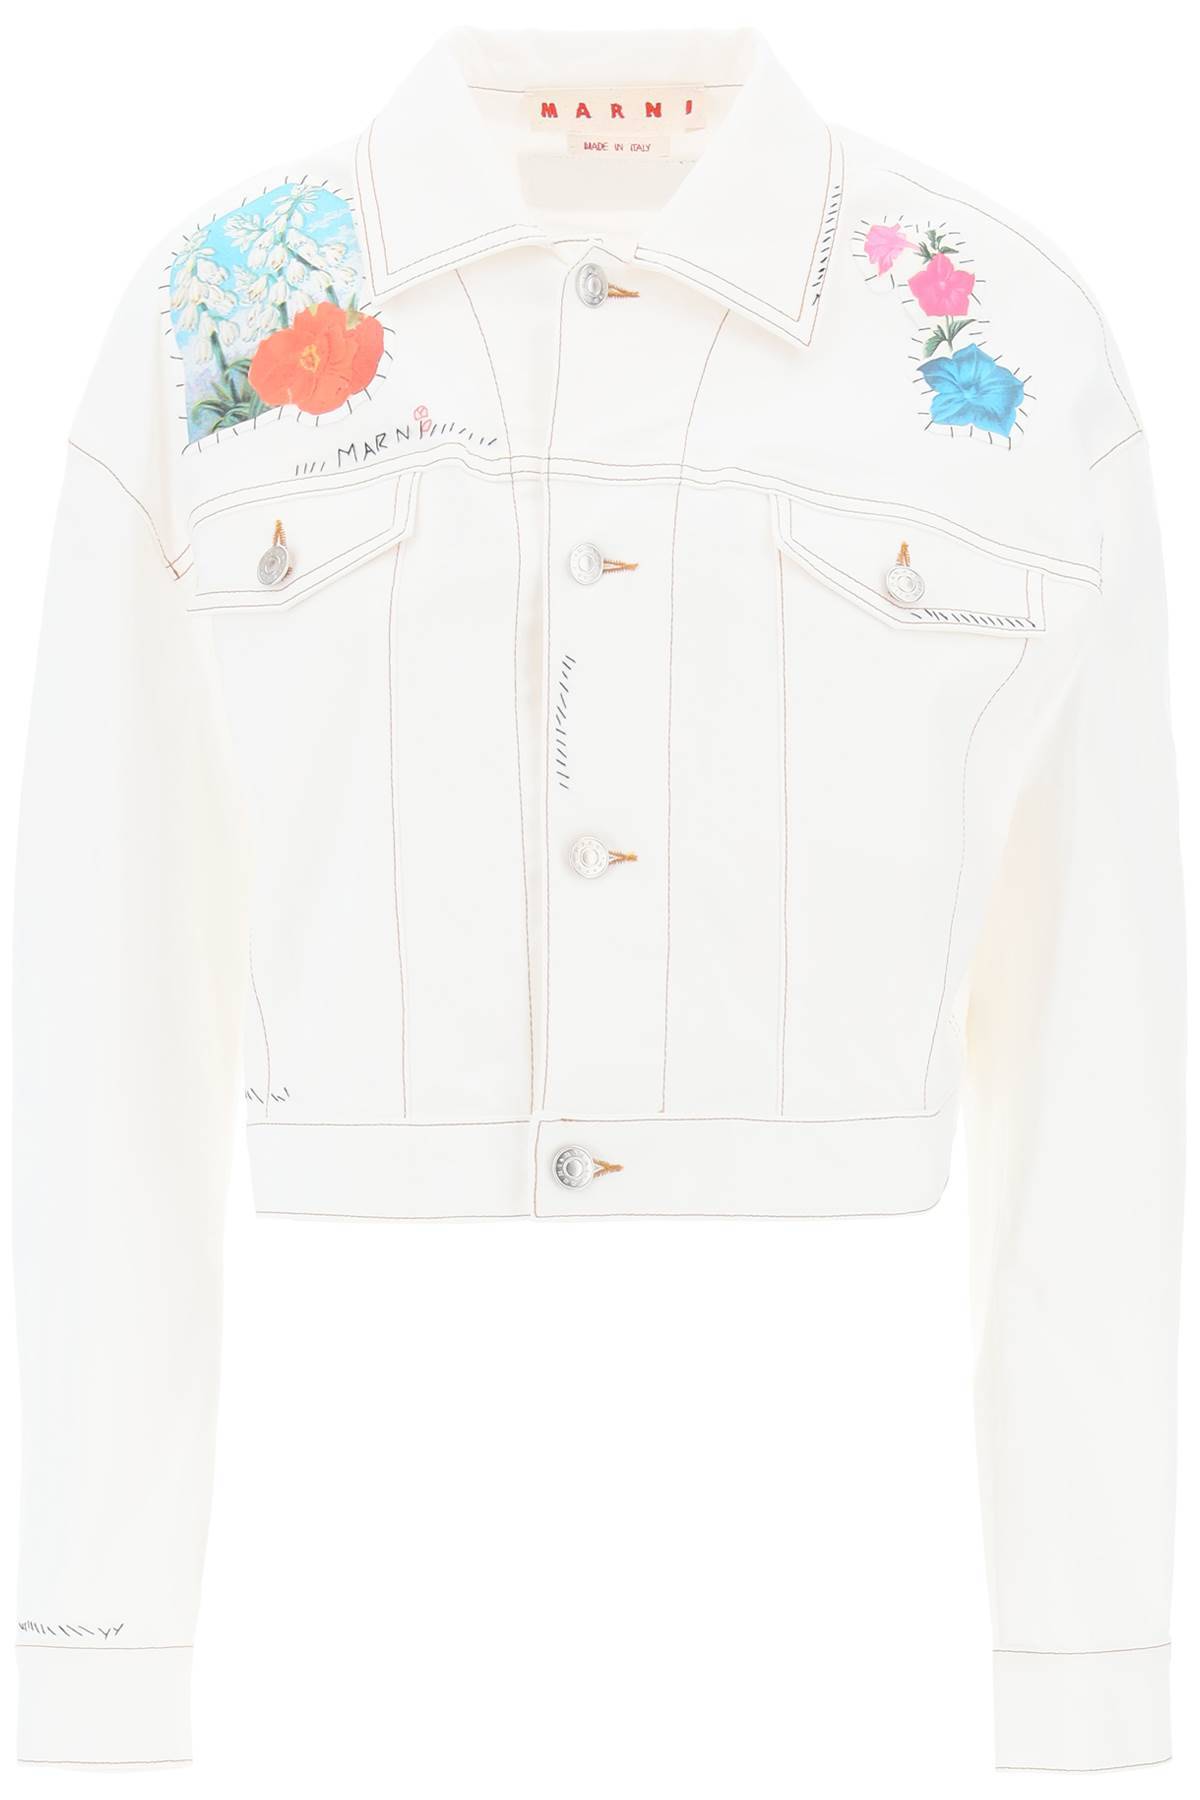 Marni MARNI "cropped denim jacket with flower patches and embroidery"